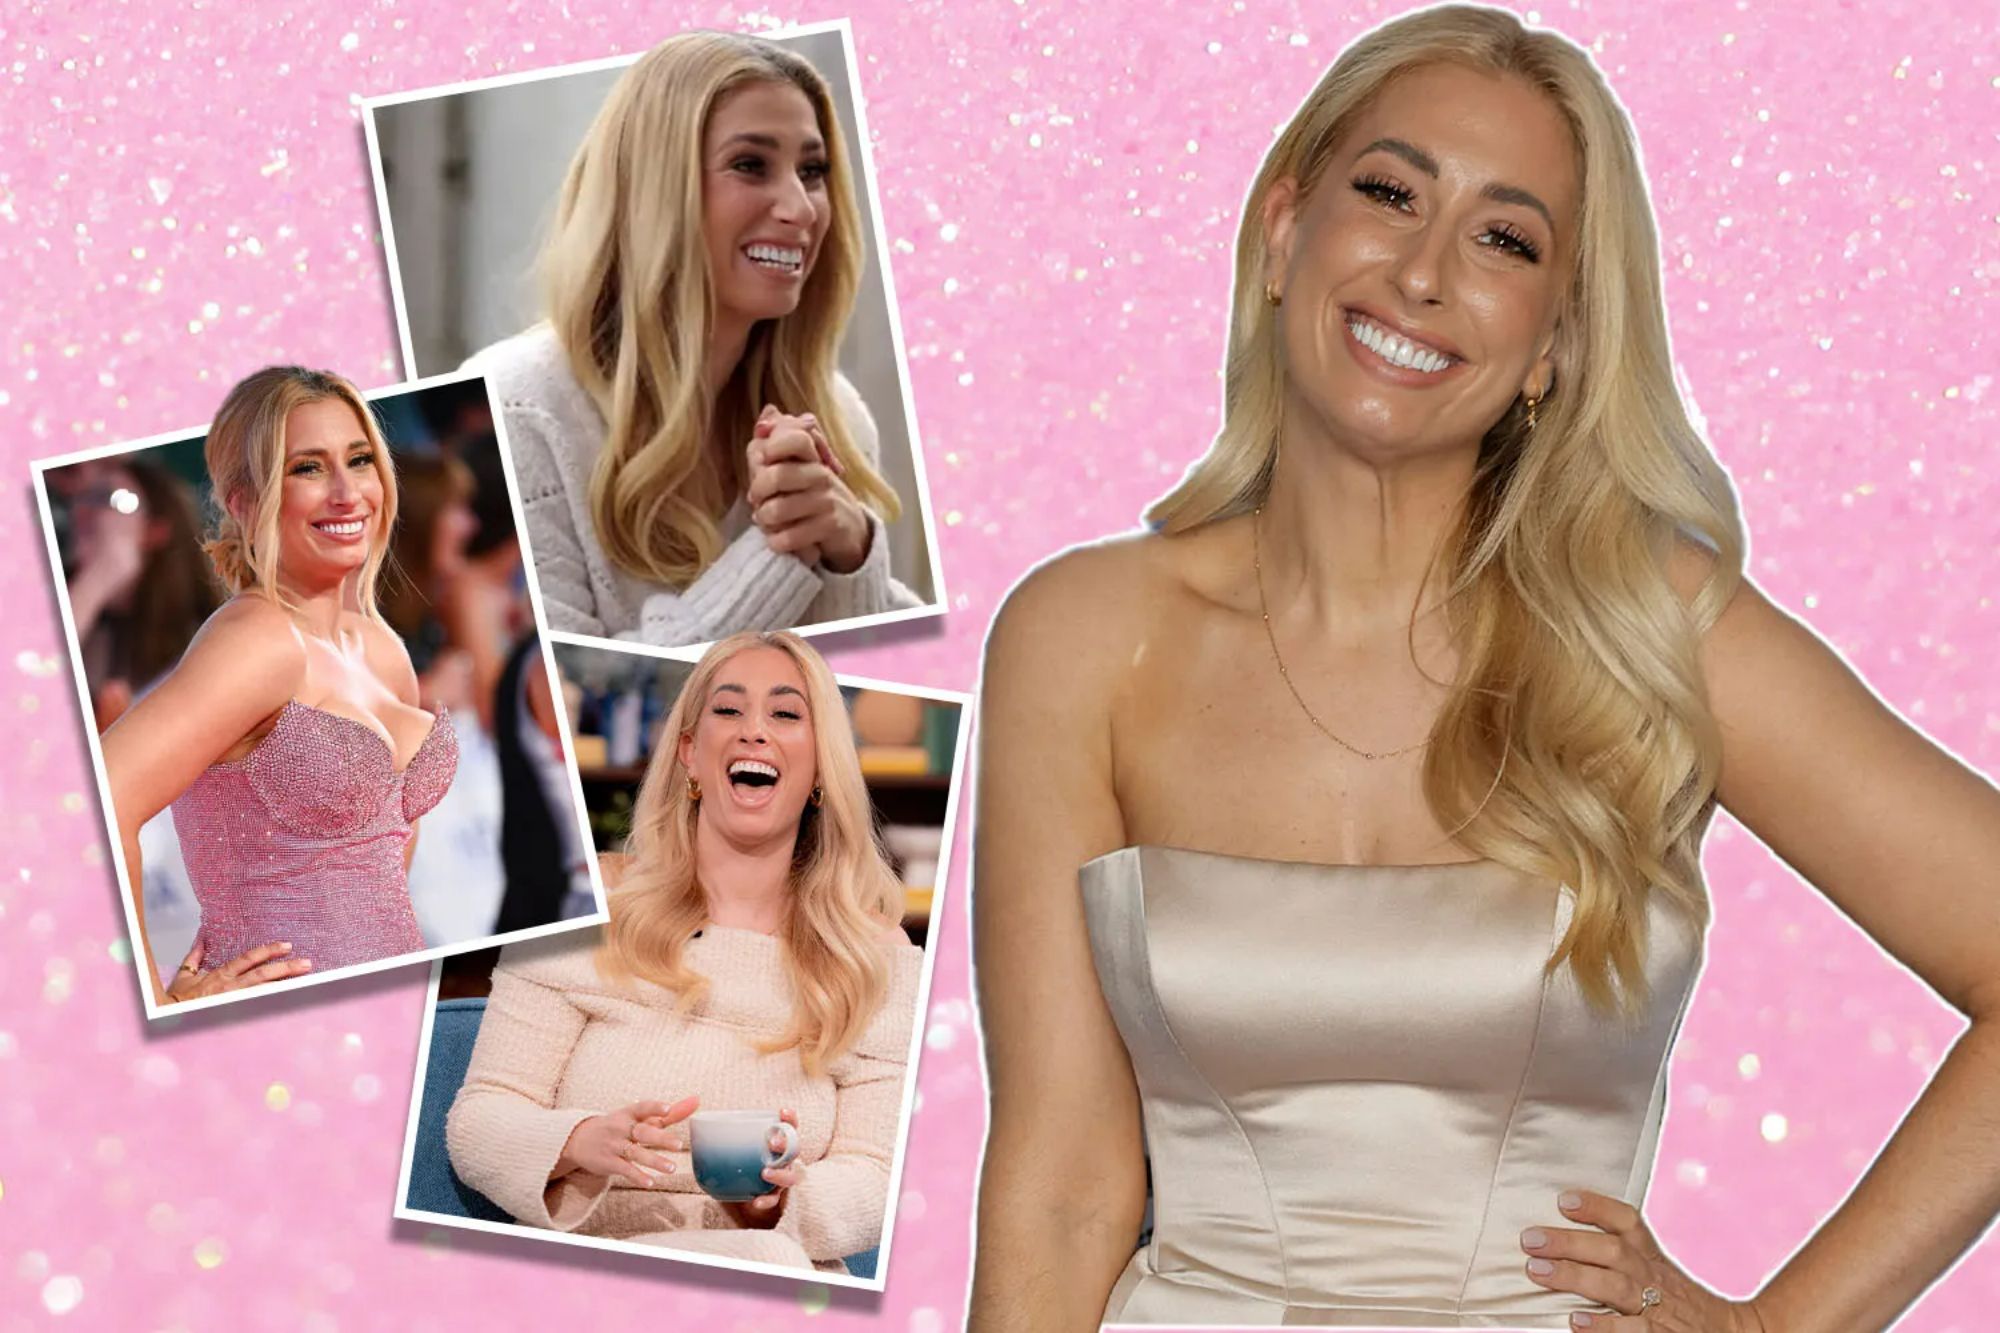 Stacey Solomon set to make £1.5 MILLION as she launches beauty brand, says expert